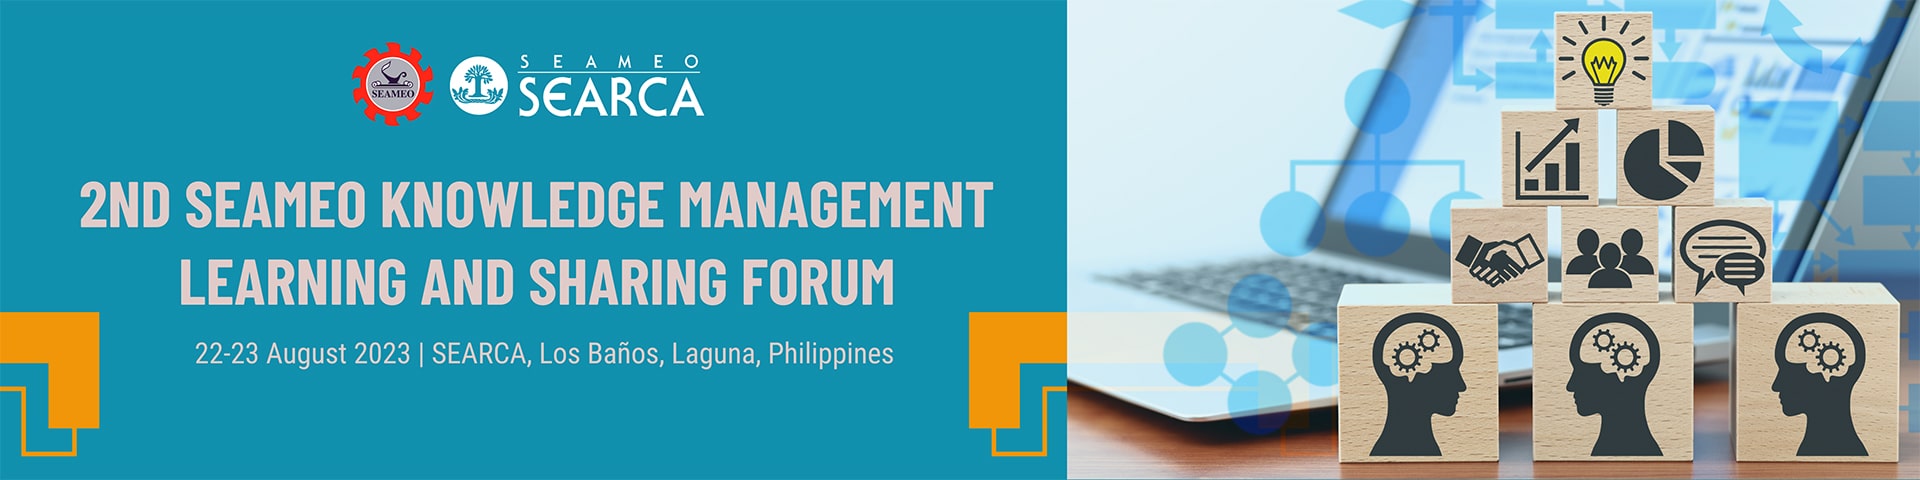 2nd SEAMEO Knowledge Management Learning and Sharing Forum